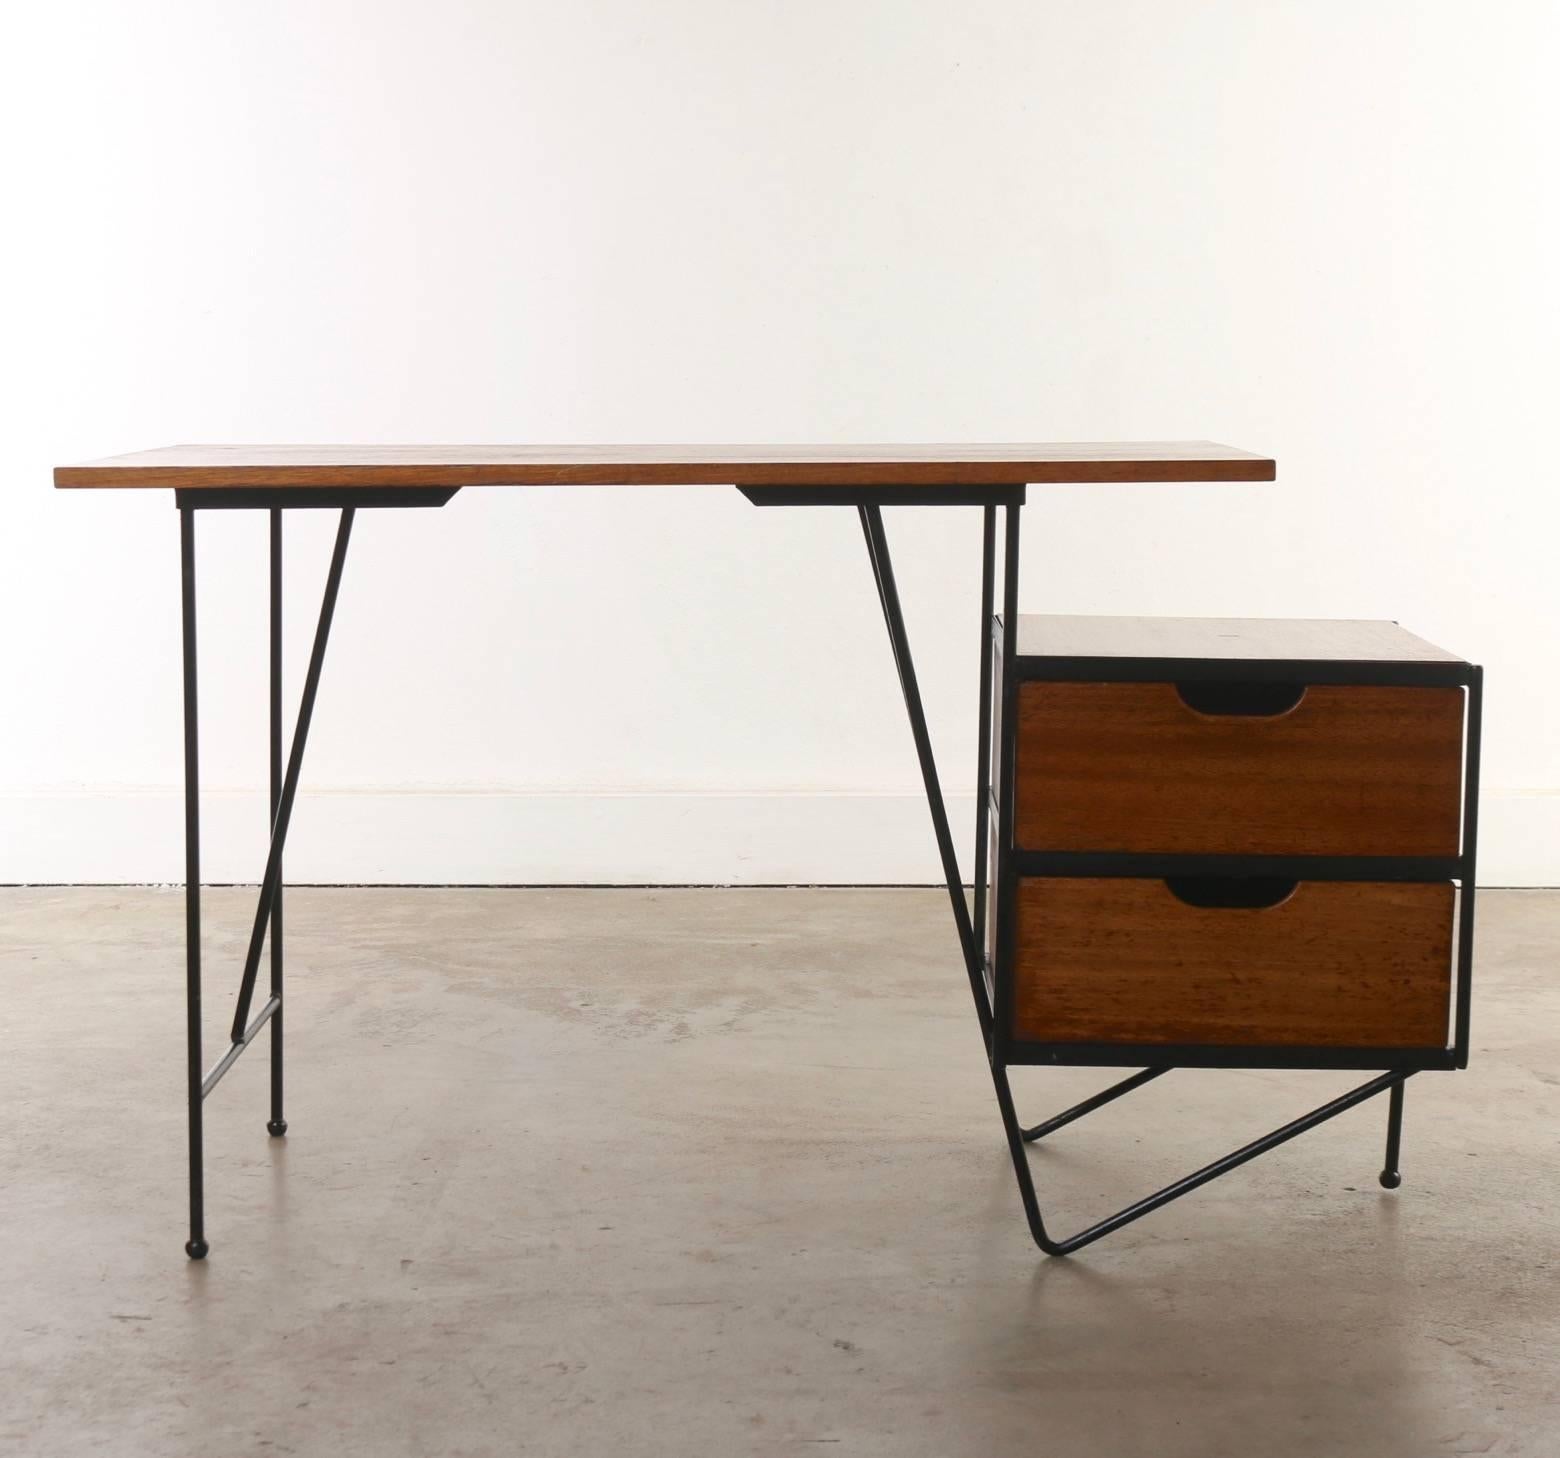 American Vista Furniture Company Desk by D.R. Bates and Jackson Gregory Jr., USA, 1955